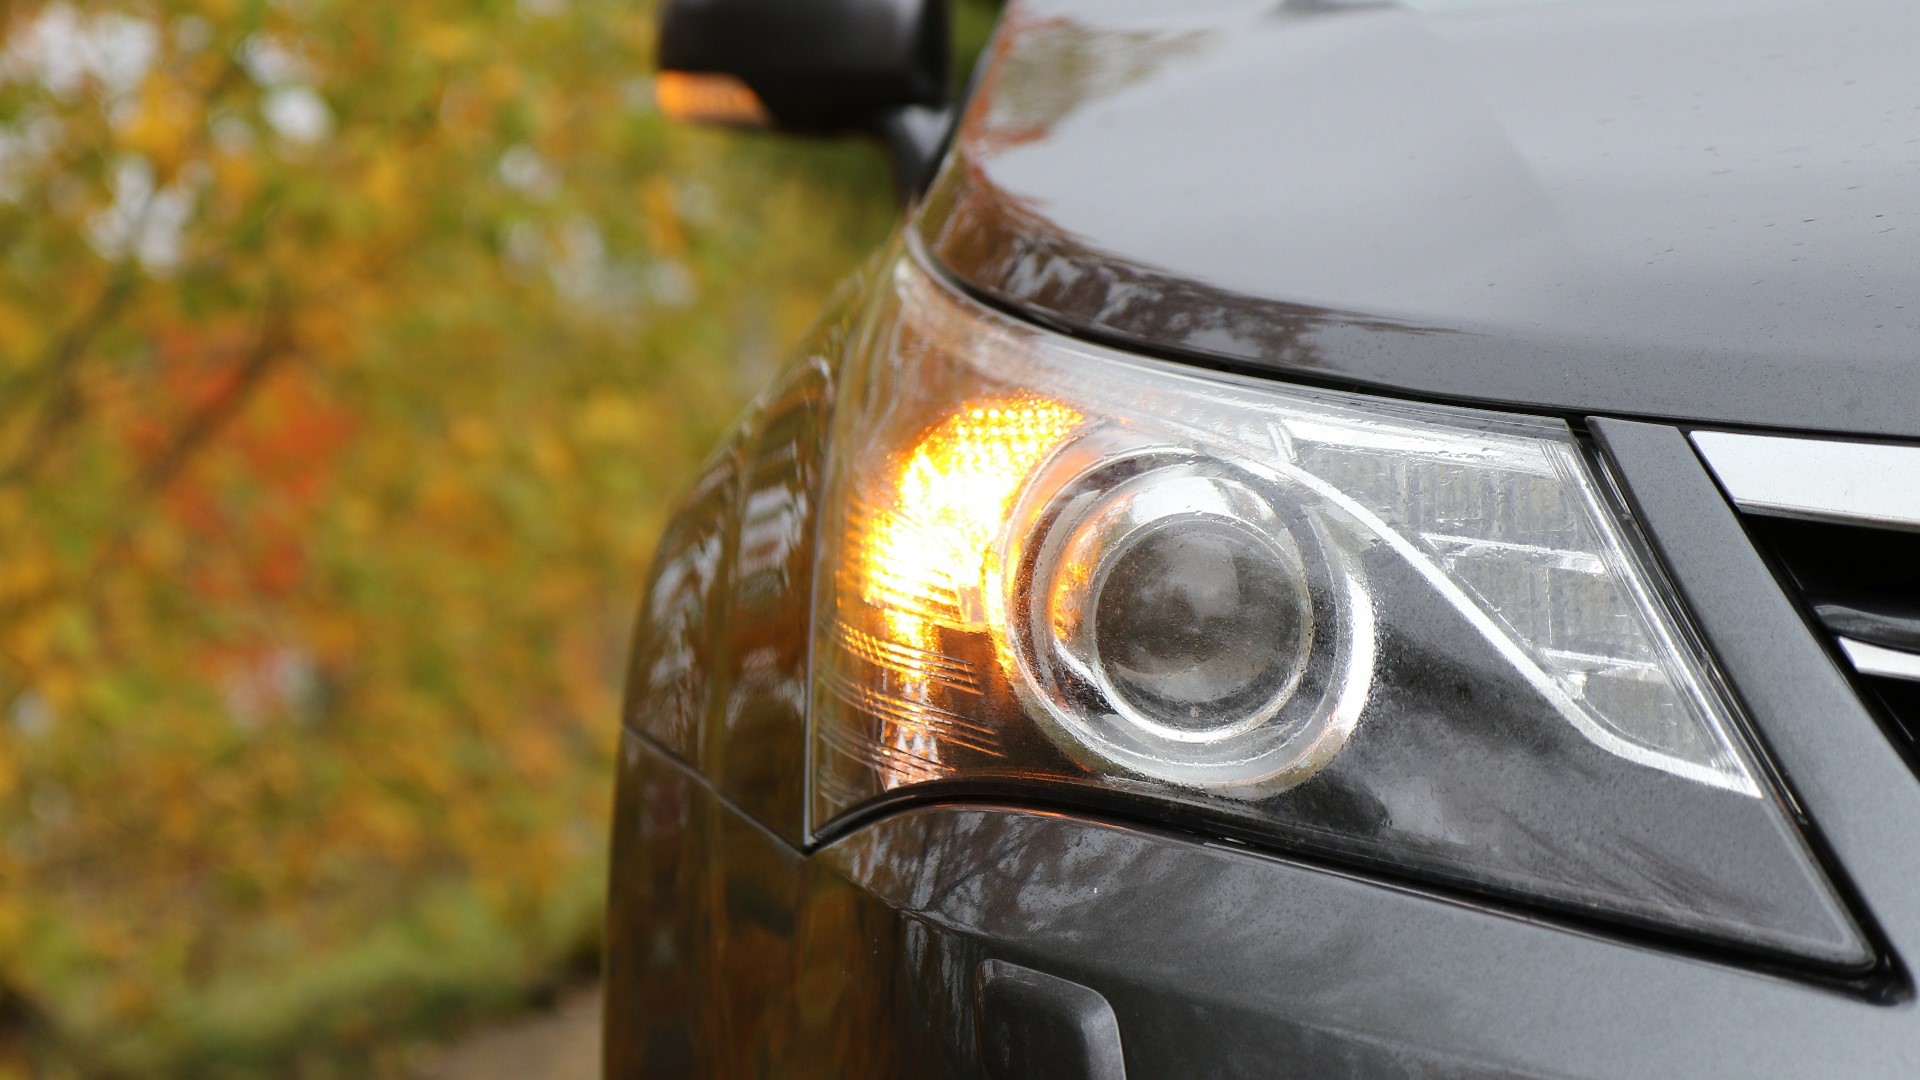 A study on turn signals, conducted by the Society of Automotive Engineers, found that 2 million crashes a year could be averted if drivers properly used blinkers.